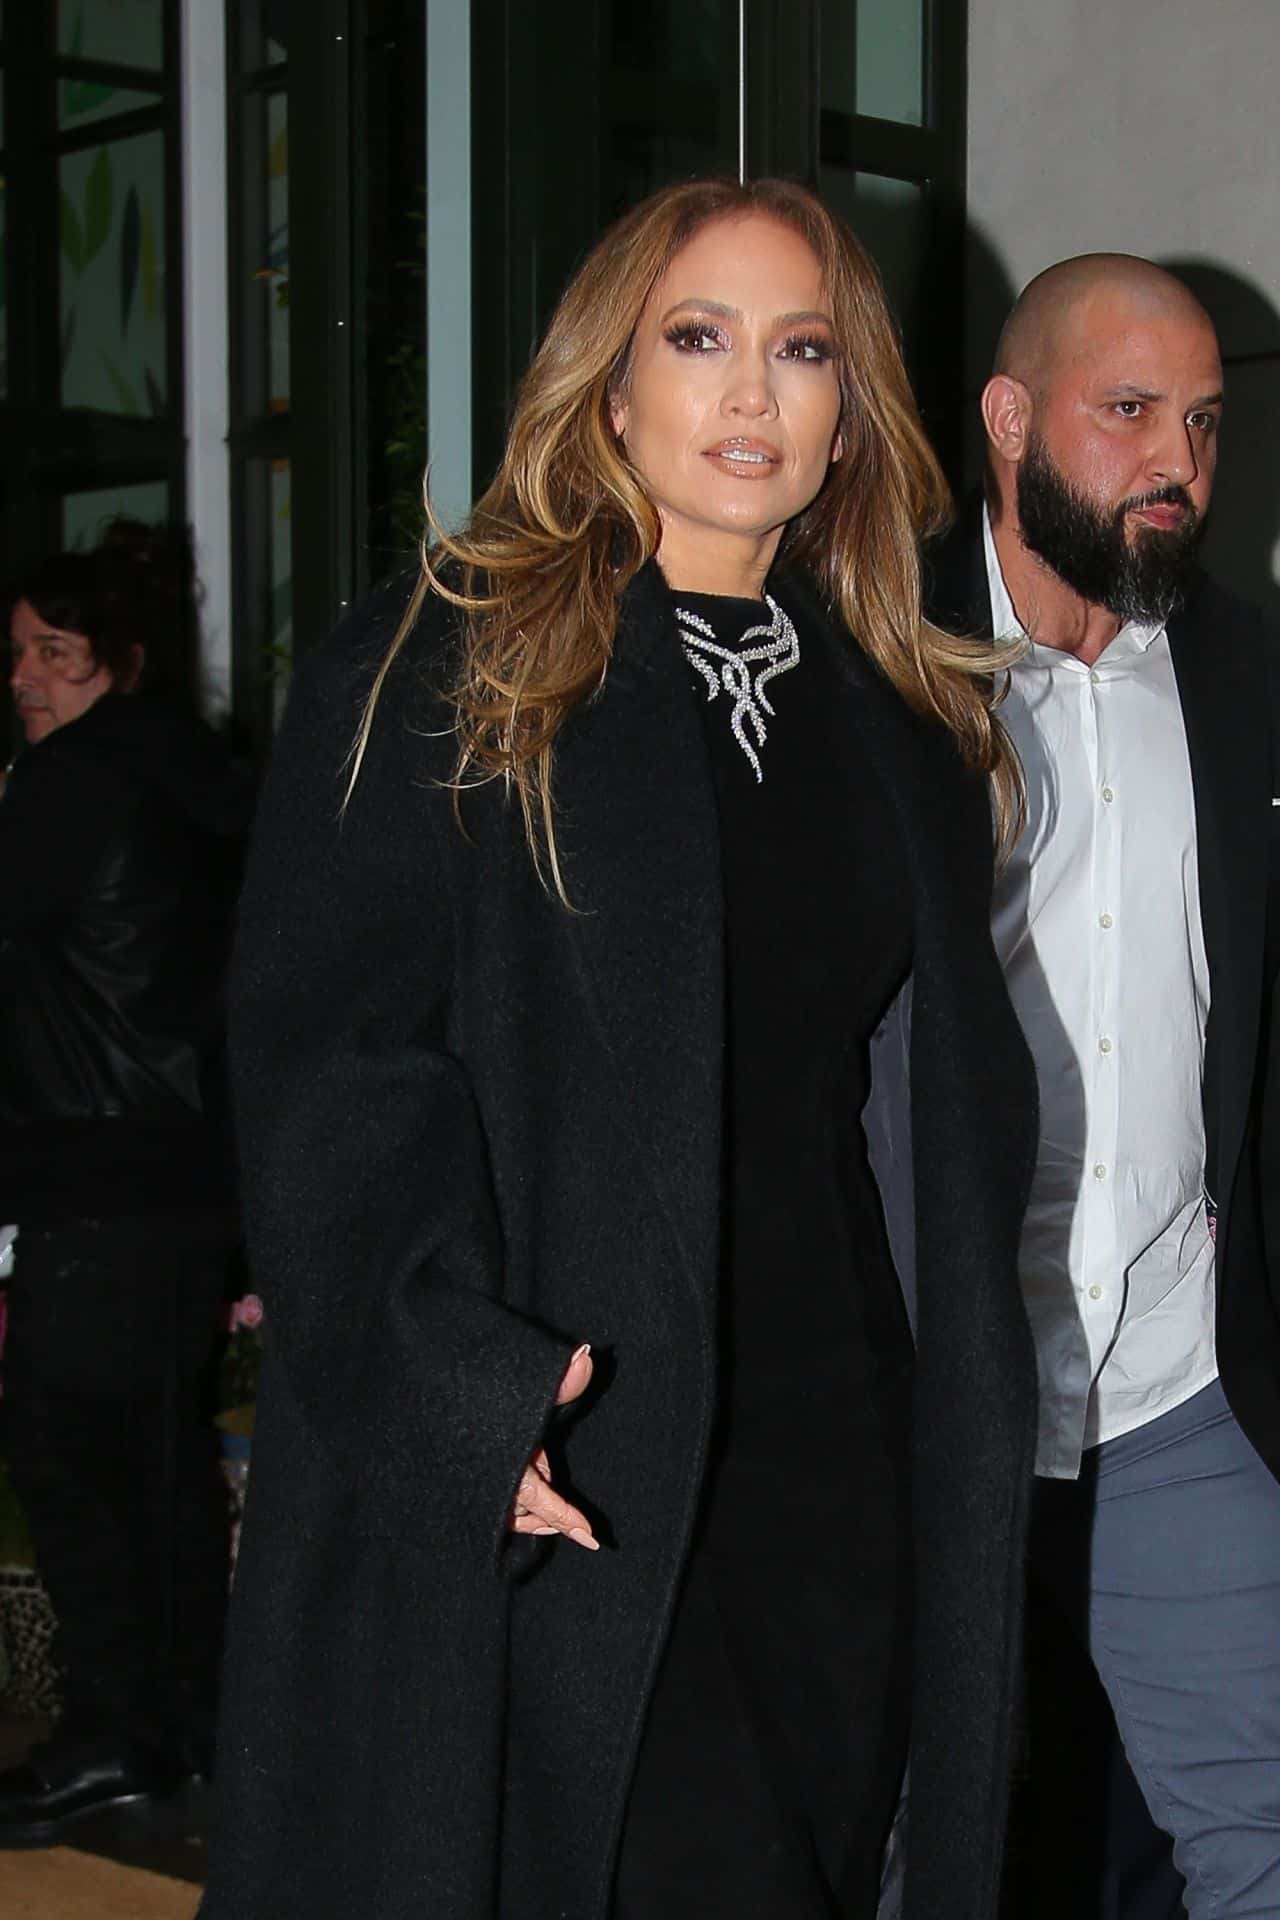 Jennifer Lopez in Amazing Black Versace Dress at "The Mother" Screening